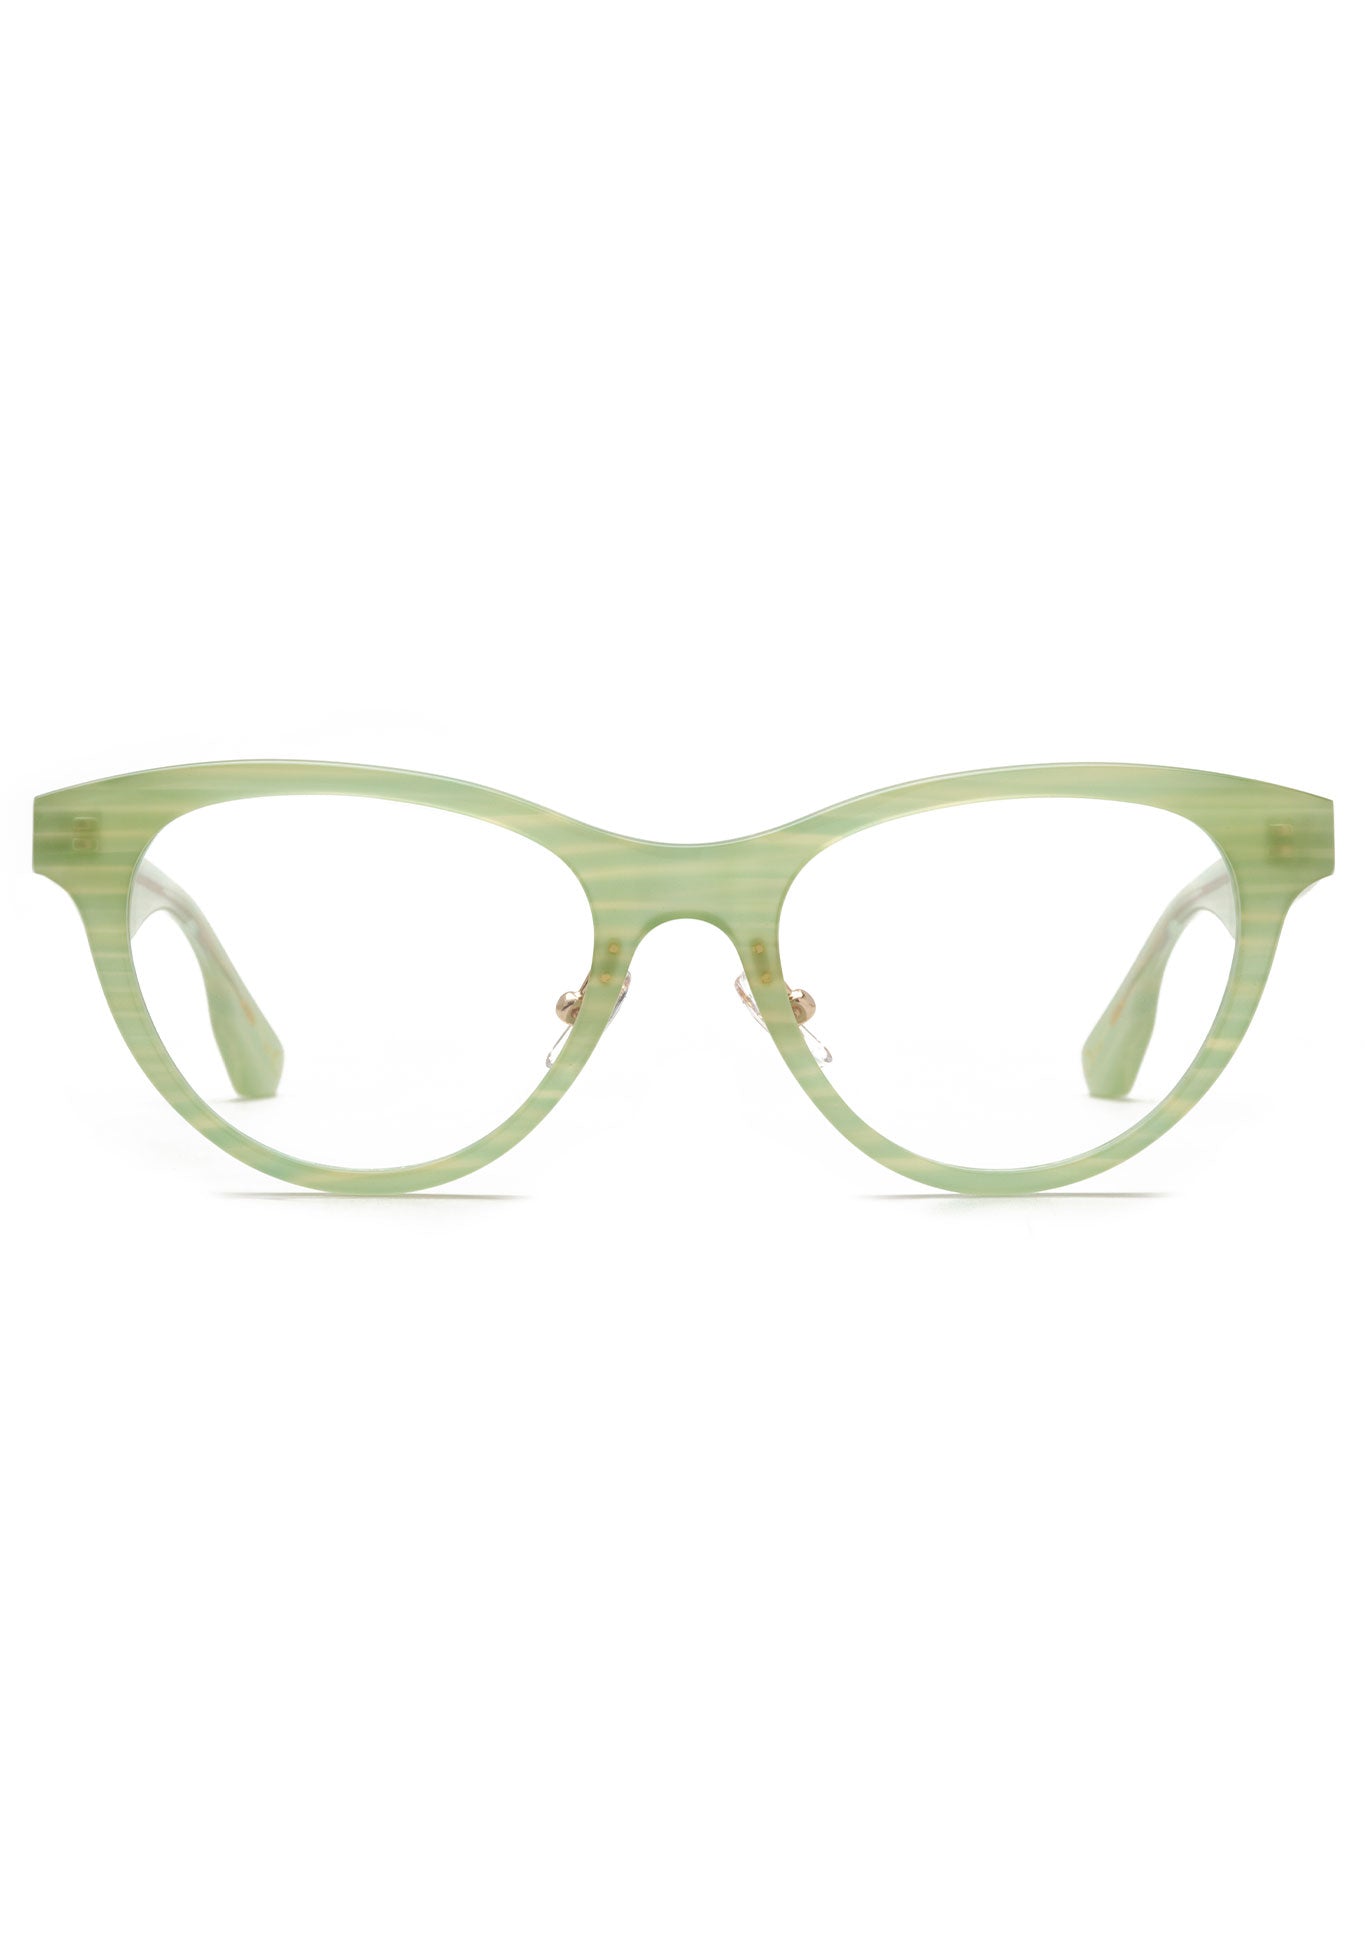 KREWE ANNETTE | Basil, Handcrafted, Luxury Acetate Green Glasses